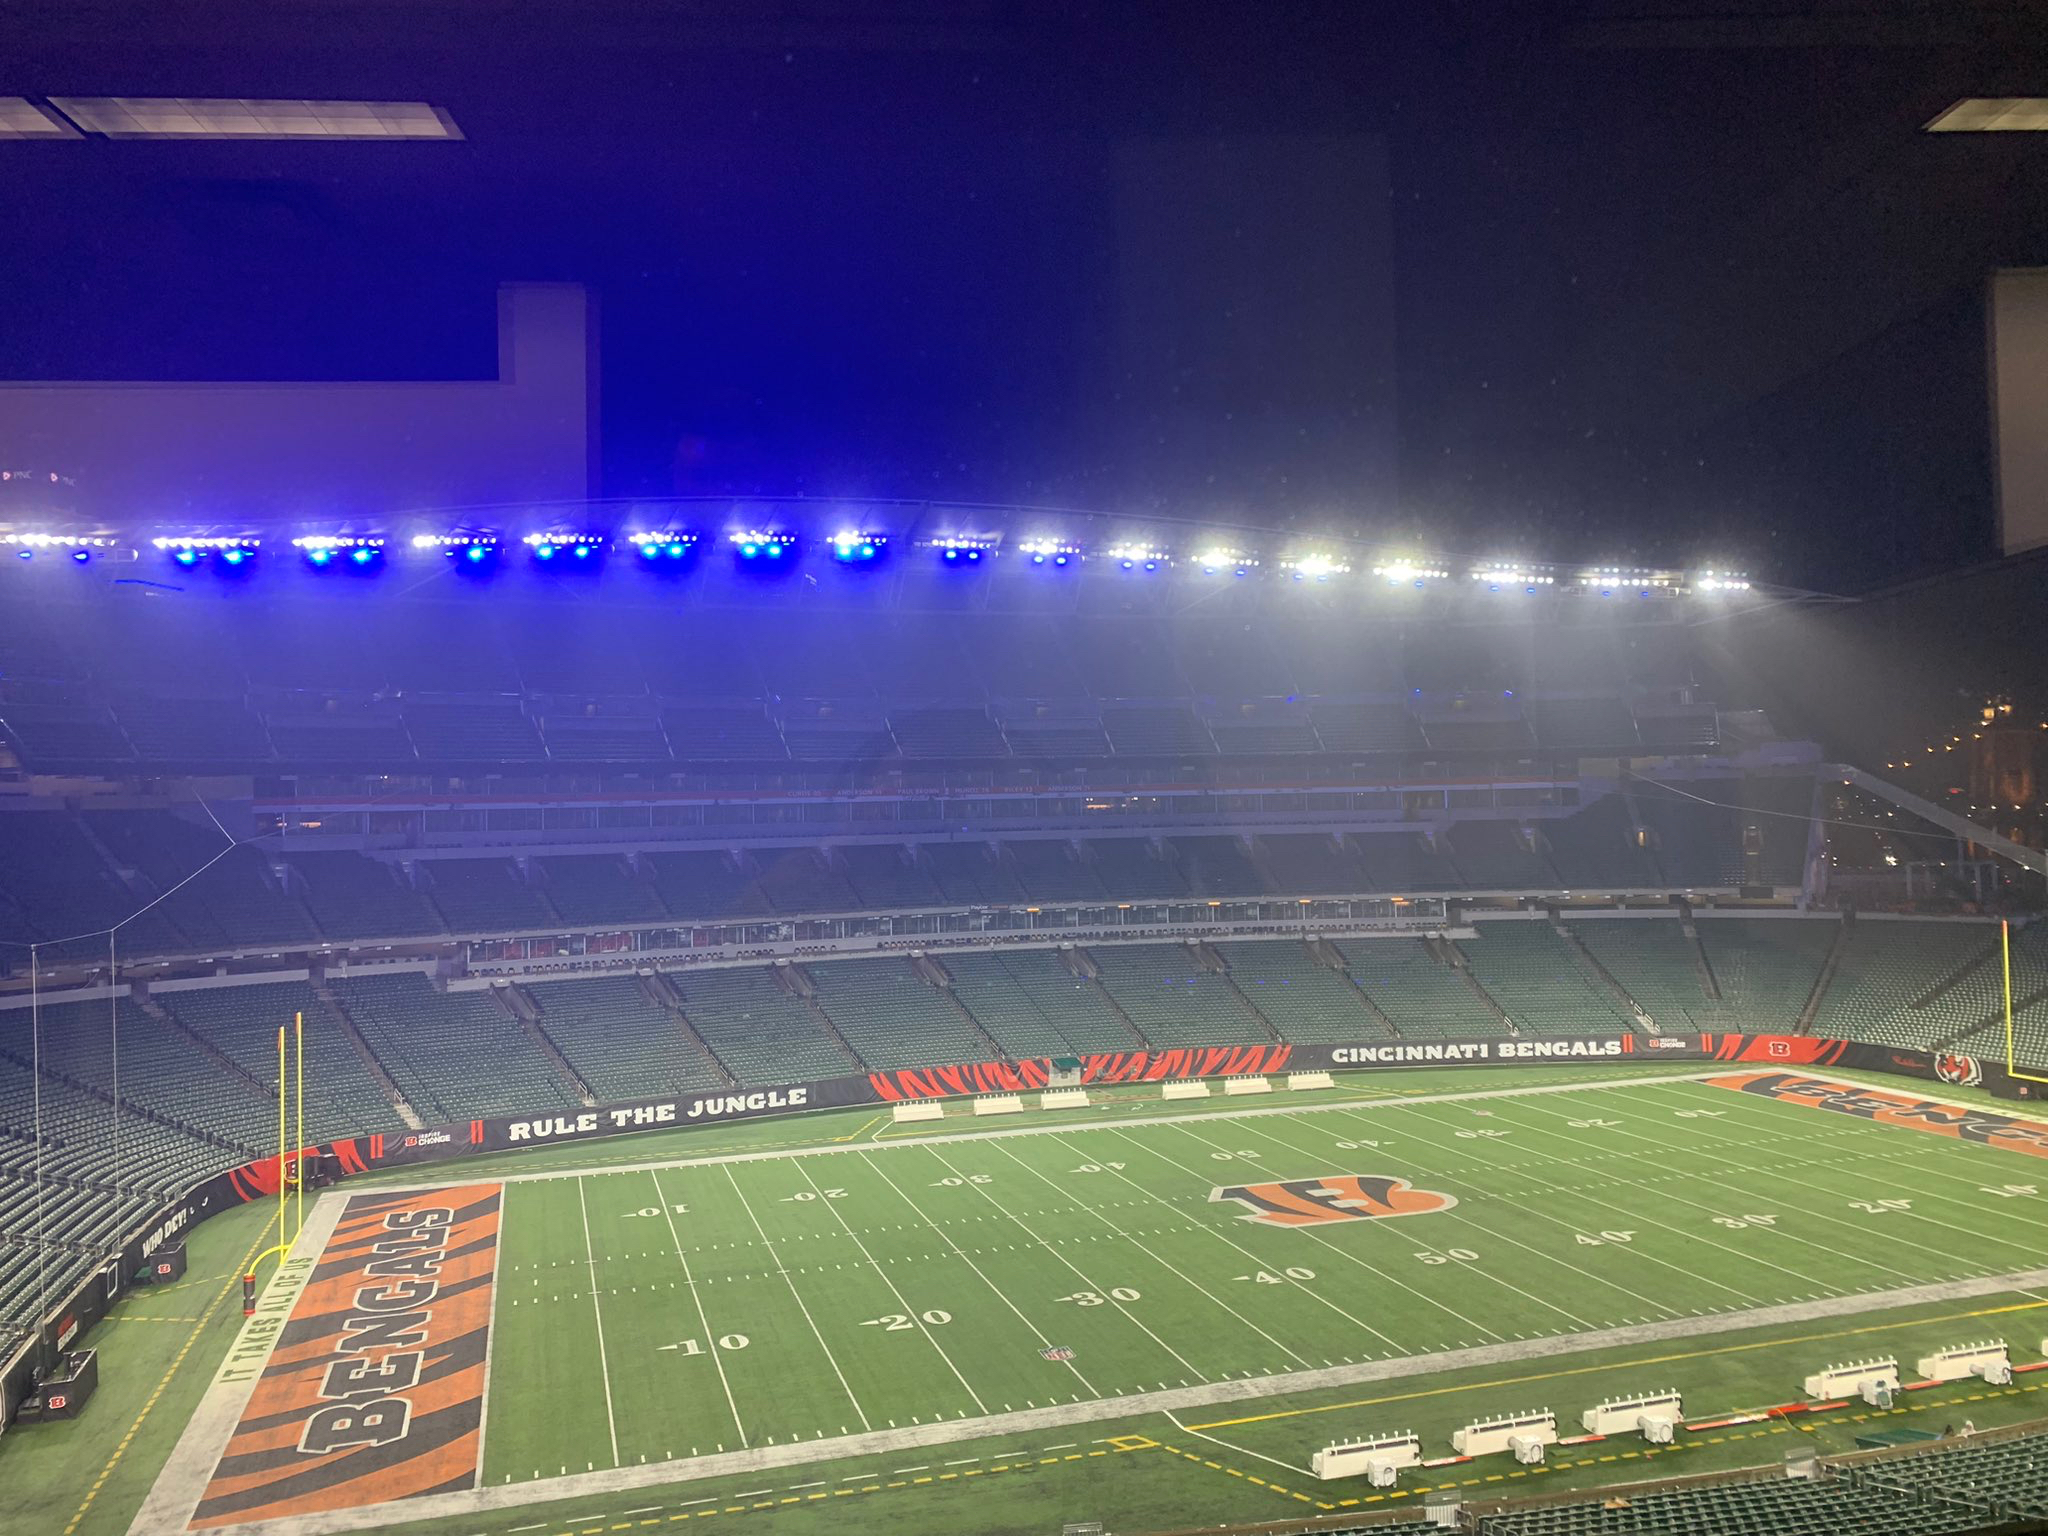 clevelanddotcom on X: 'The Bengals have changed the lights at Paycor Stadium  out of respect to Damar Hamlin and the Buffalo Bills. Photo: Mohammad Amad,  clevelanddotcom  / X